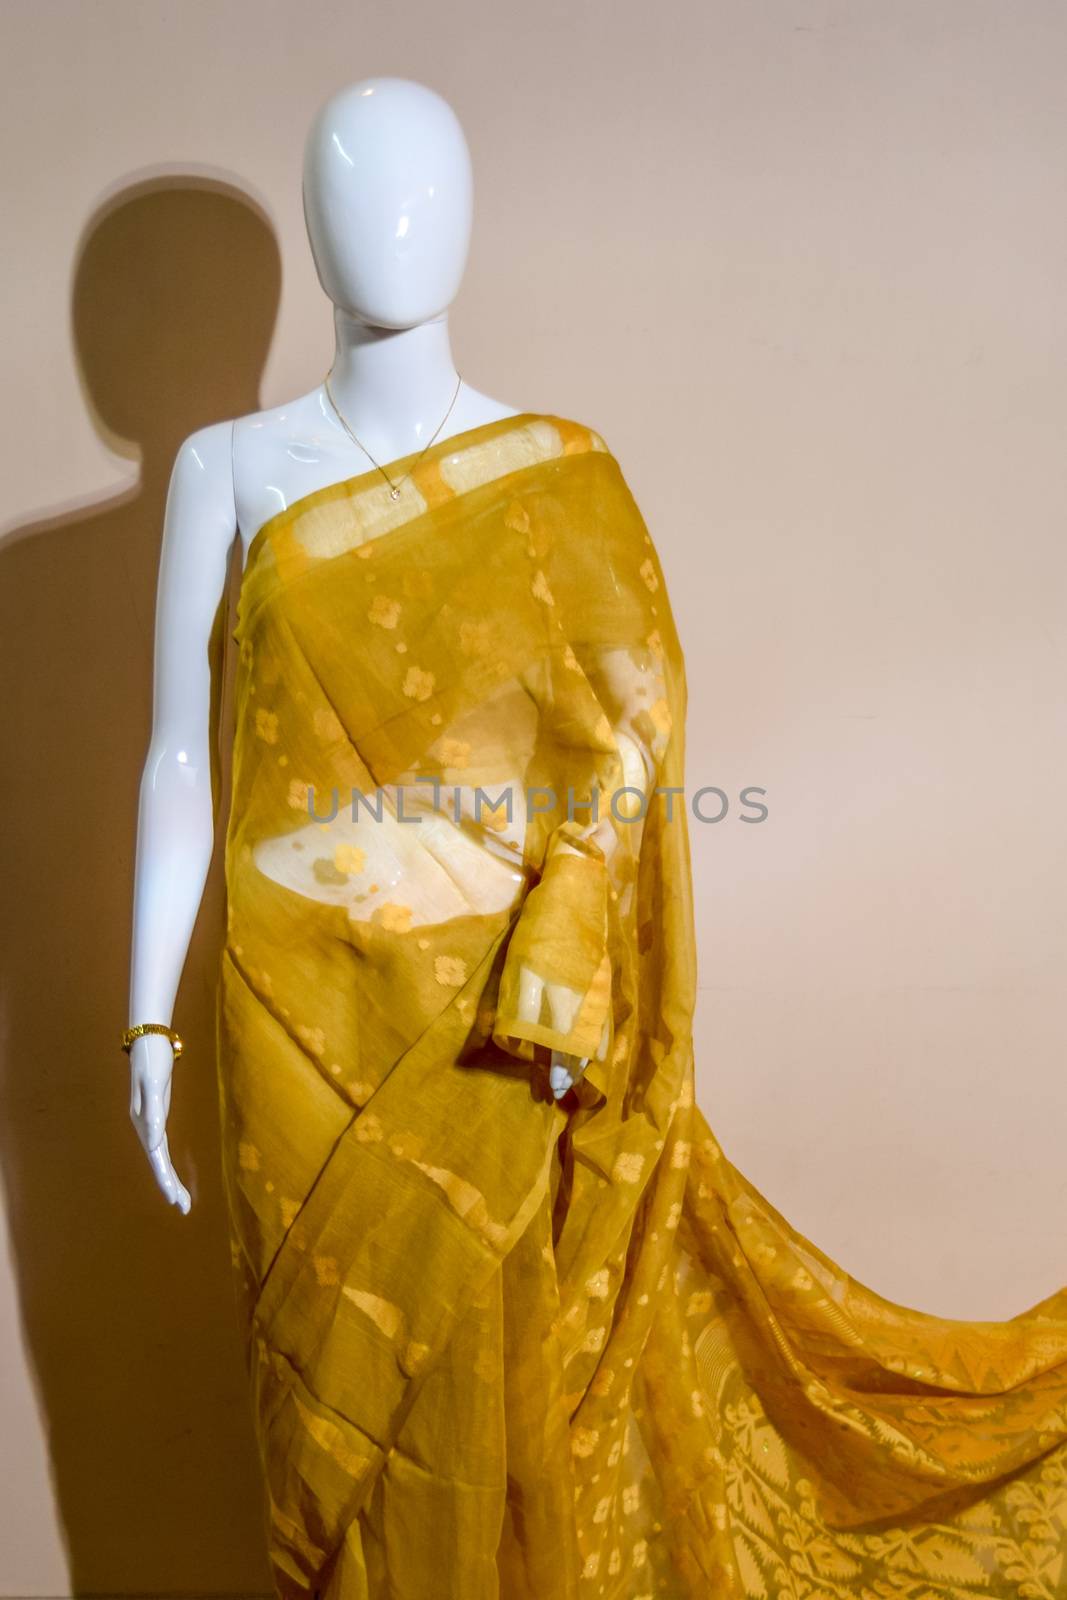 A traditional indian colorful silk saree displayed for sale. Selective focus on model face